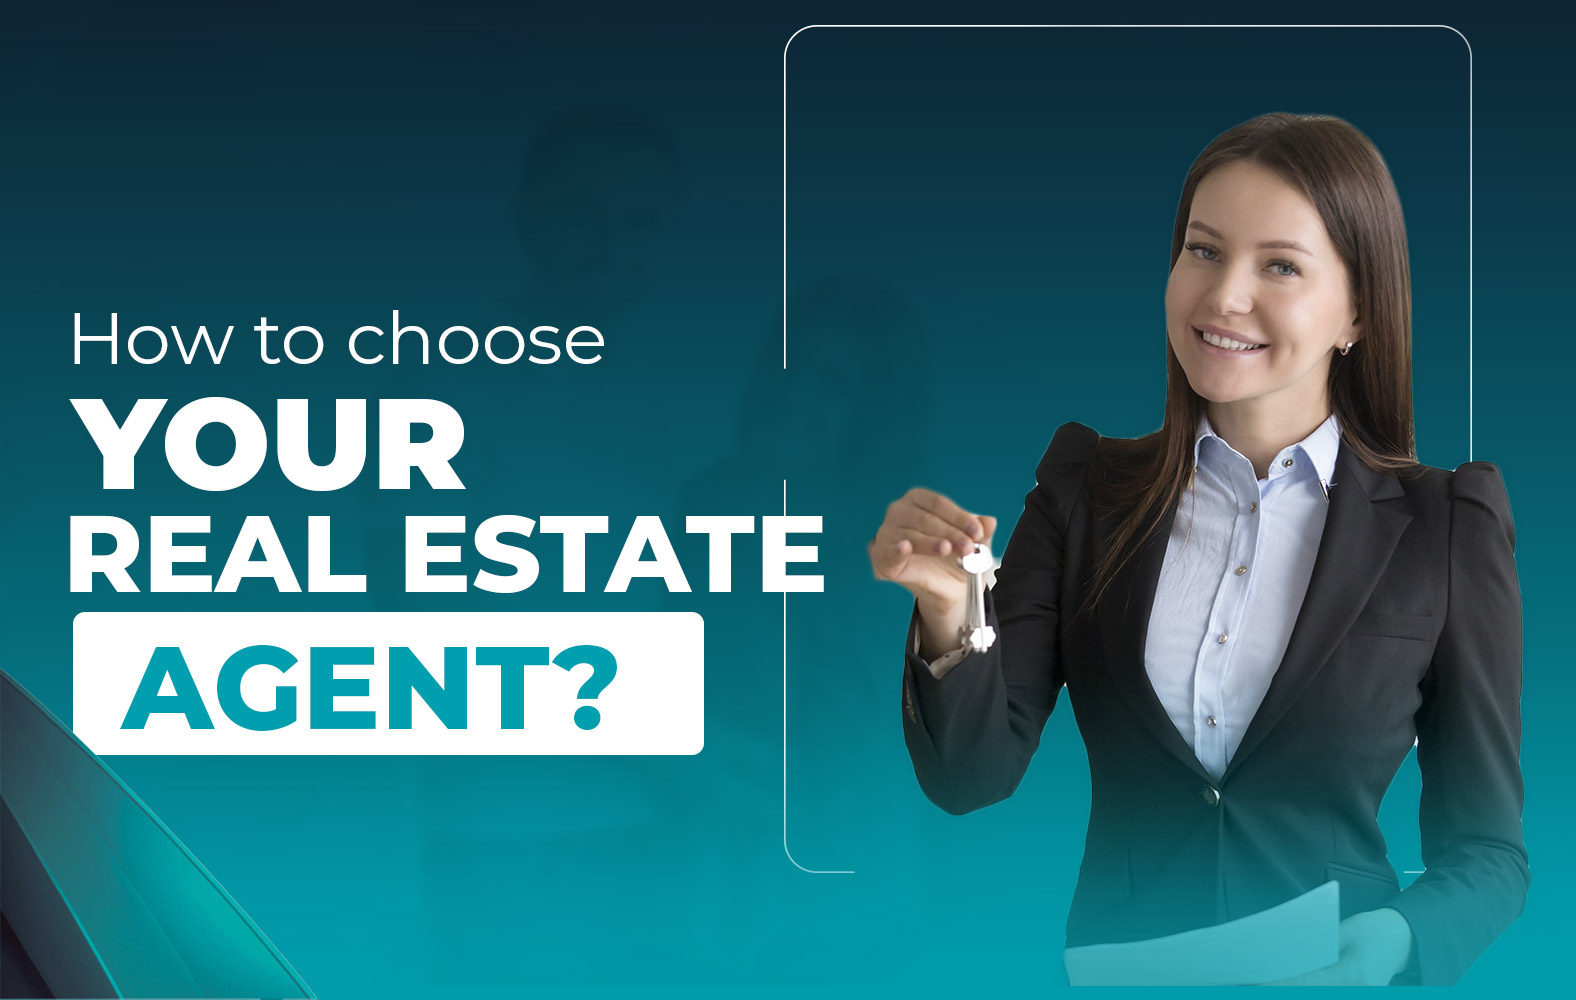 We teach you how to choose a good real estate agent